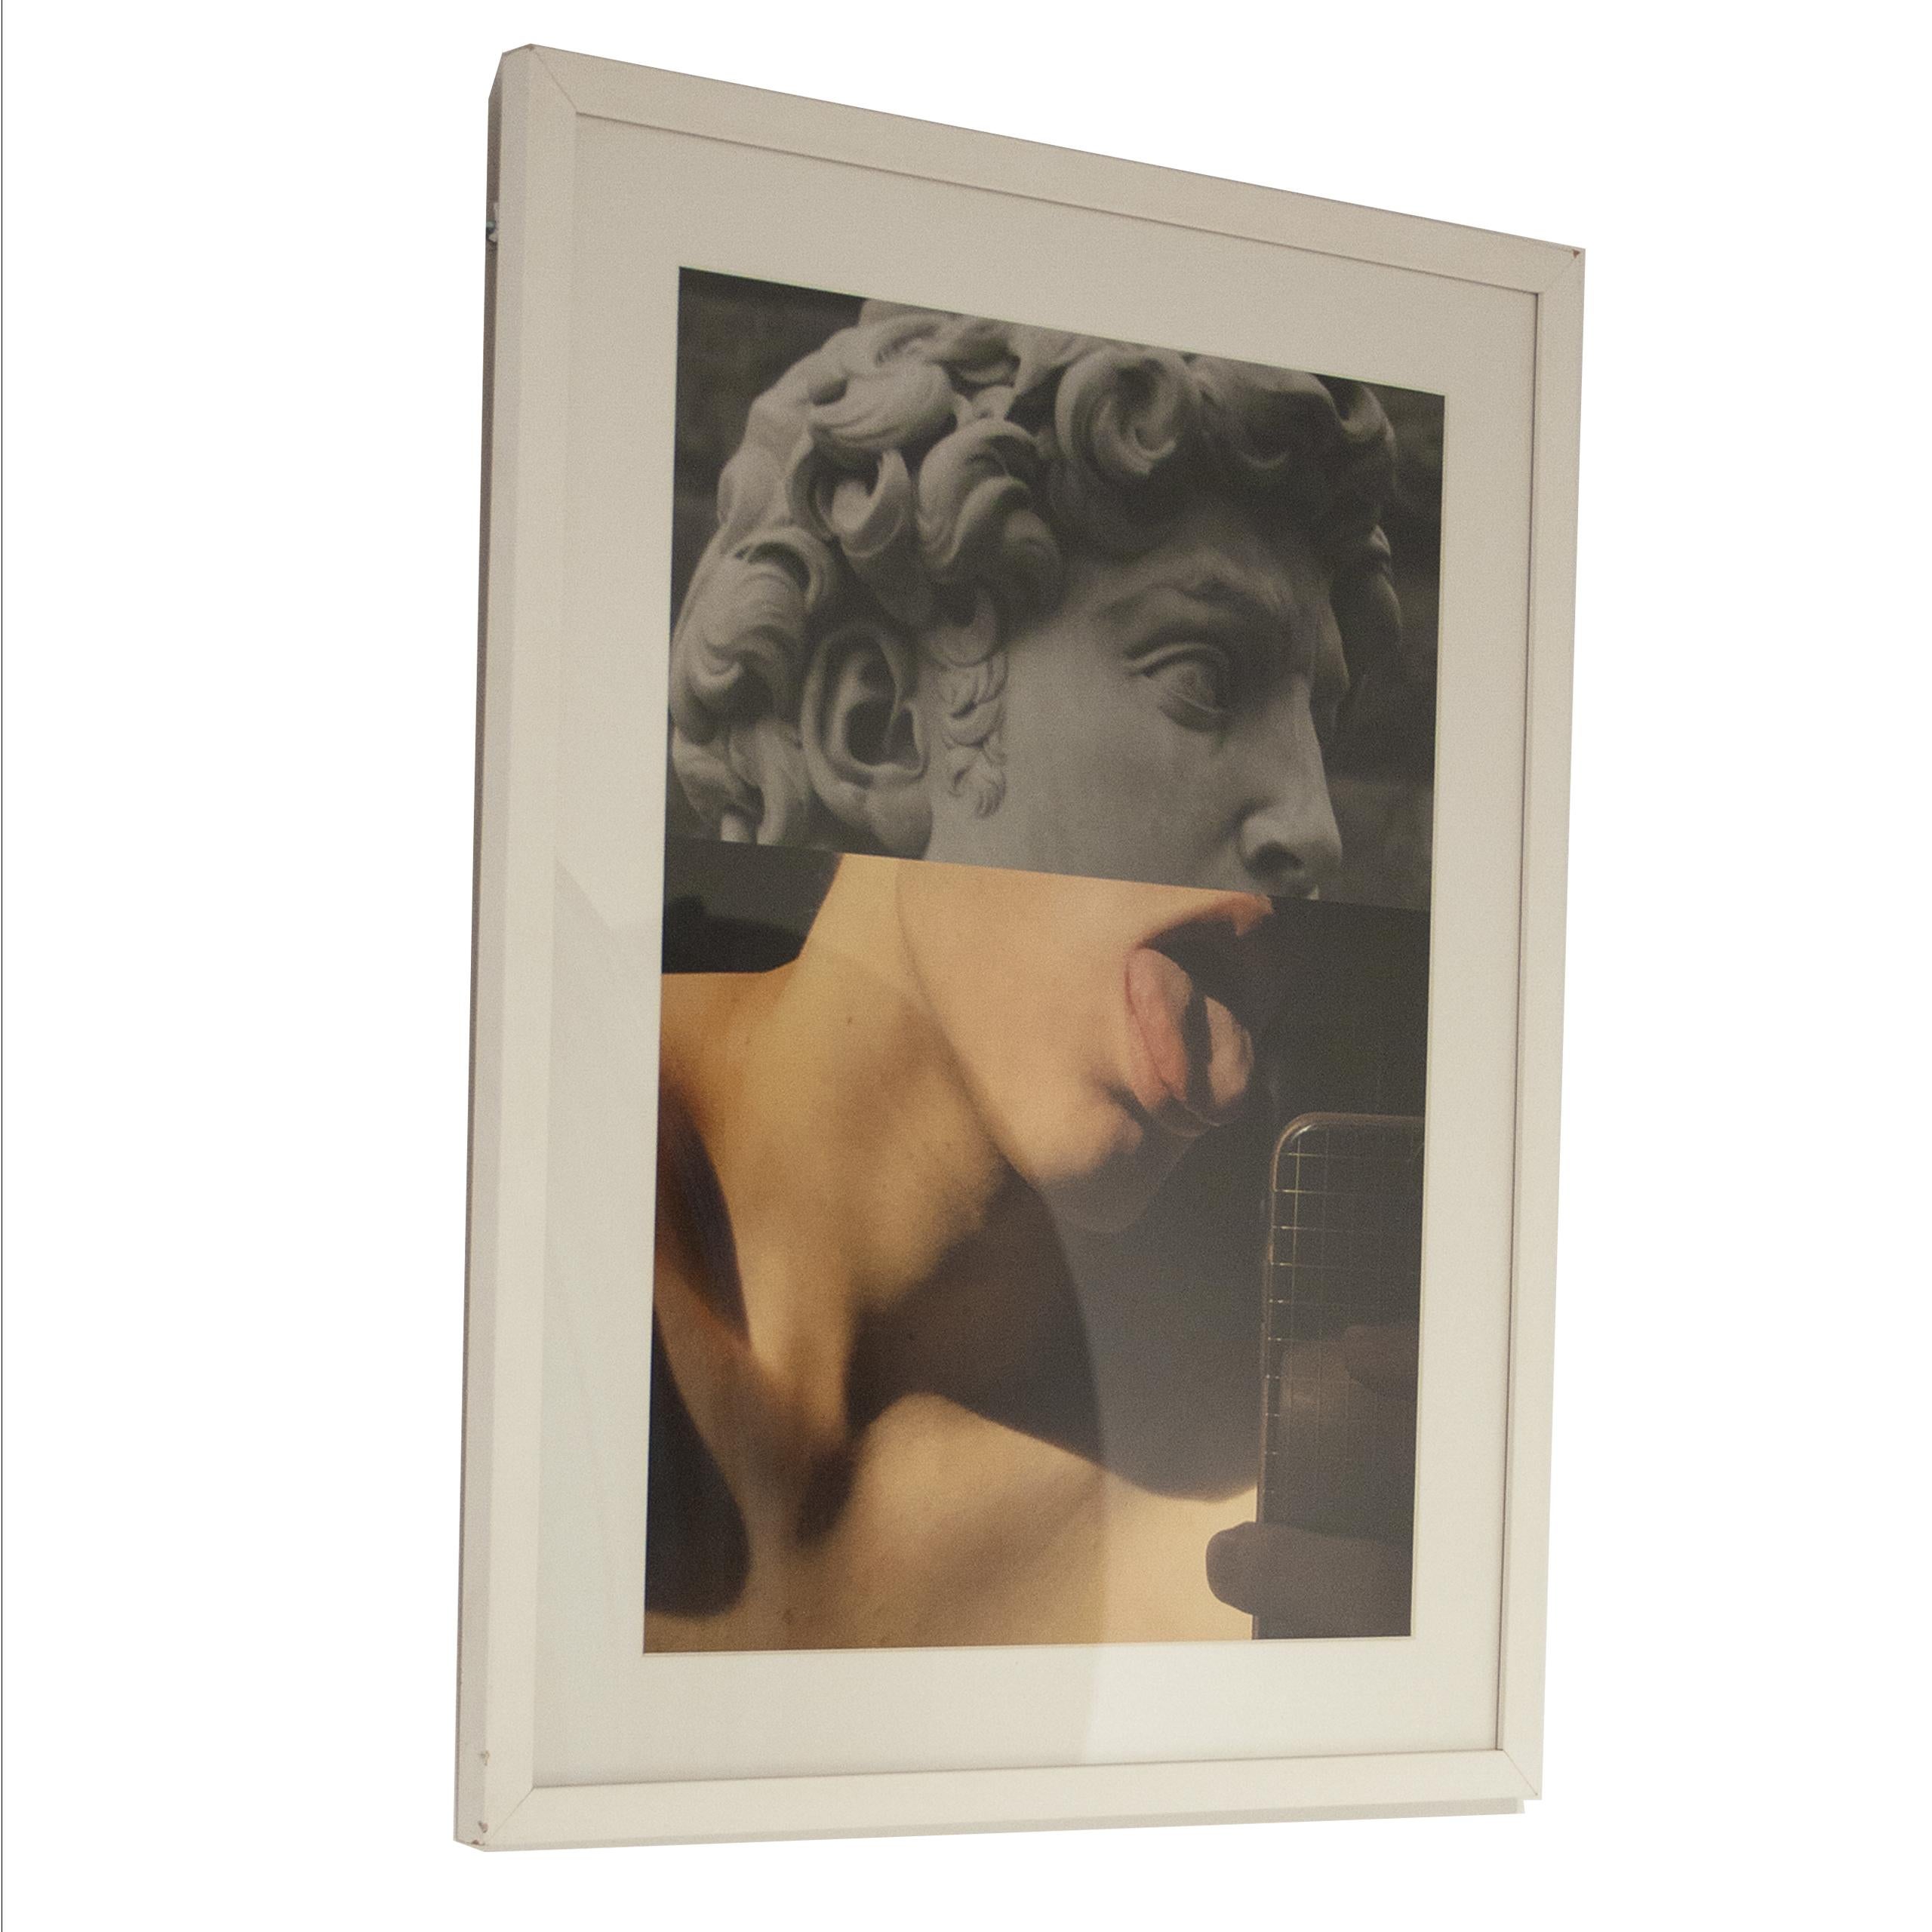 Classic sculpture and selfie boy digital collage print by Spanish artist Naro Pinosa, made famous on social media. Unique signed-by-artist piece. Authenticity certificated.
Print on photography paper. Glass and white lacquered wooden frame.